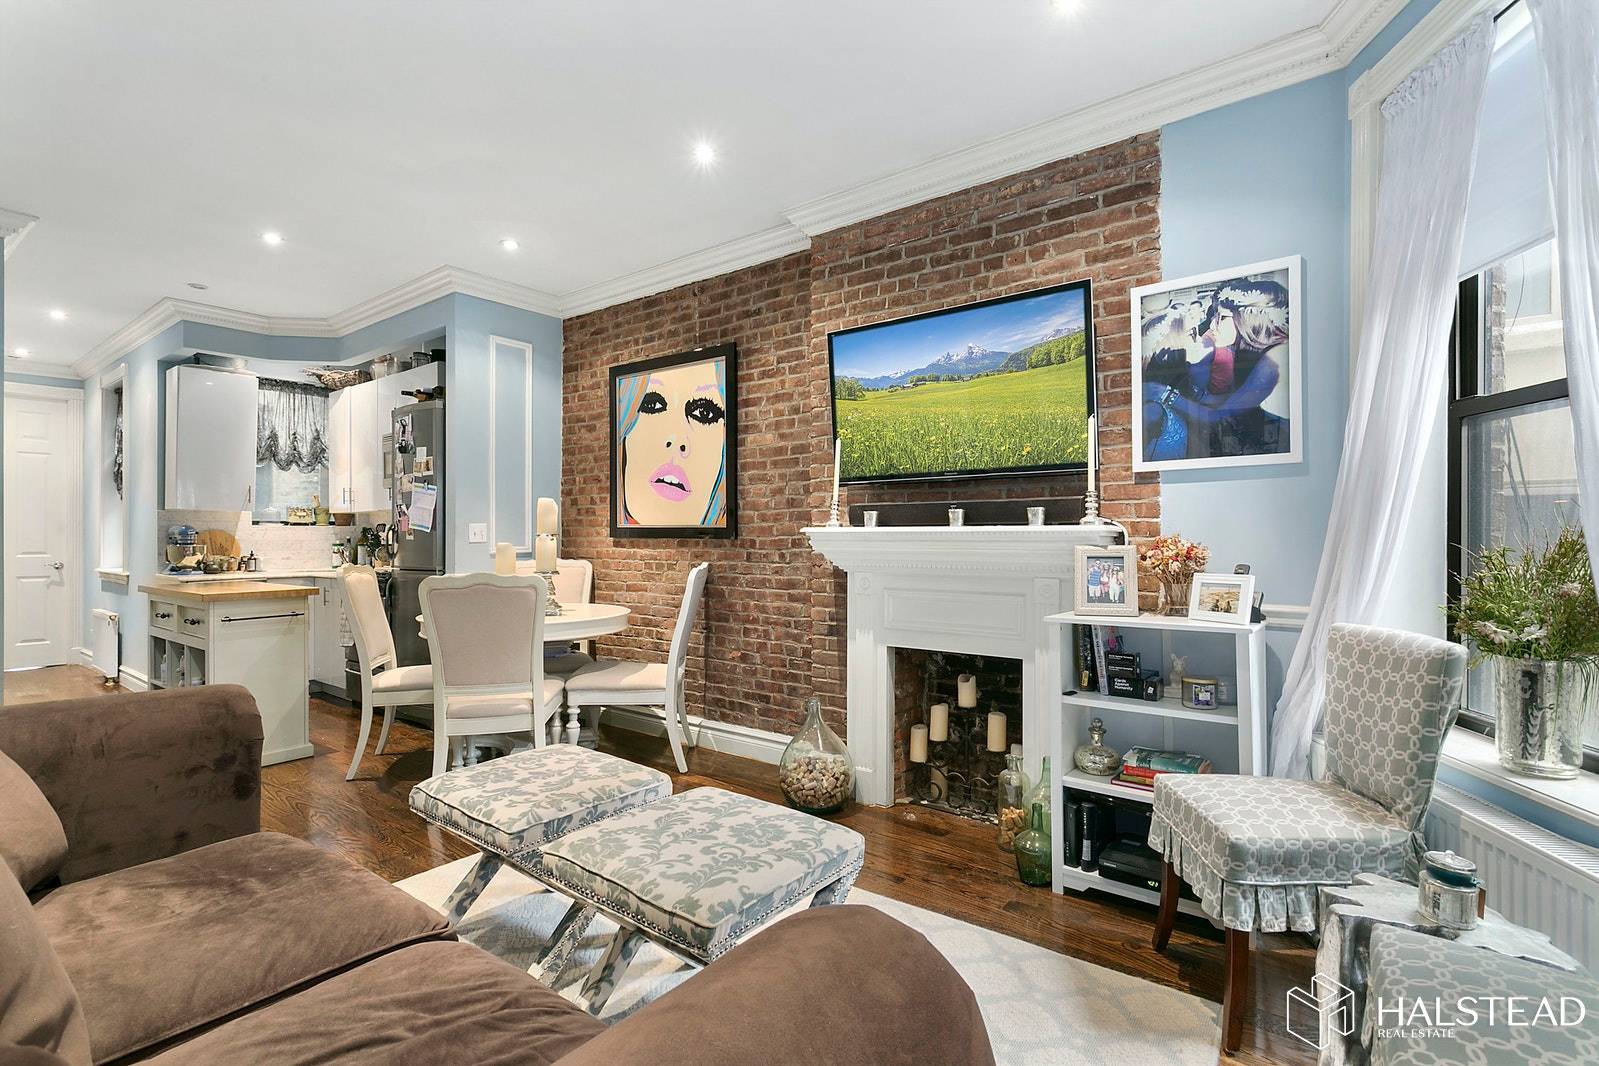 Live in this mint parlor Brownstone 2 Bed 1 Bath home which has been beautifully restored with crown moldings, walnut wood floors, exposed brick, Deco Fire Place, open kitchen with ...